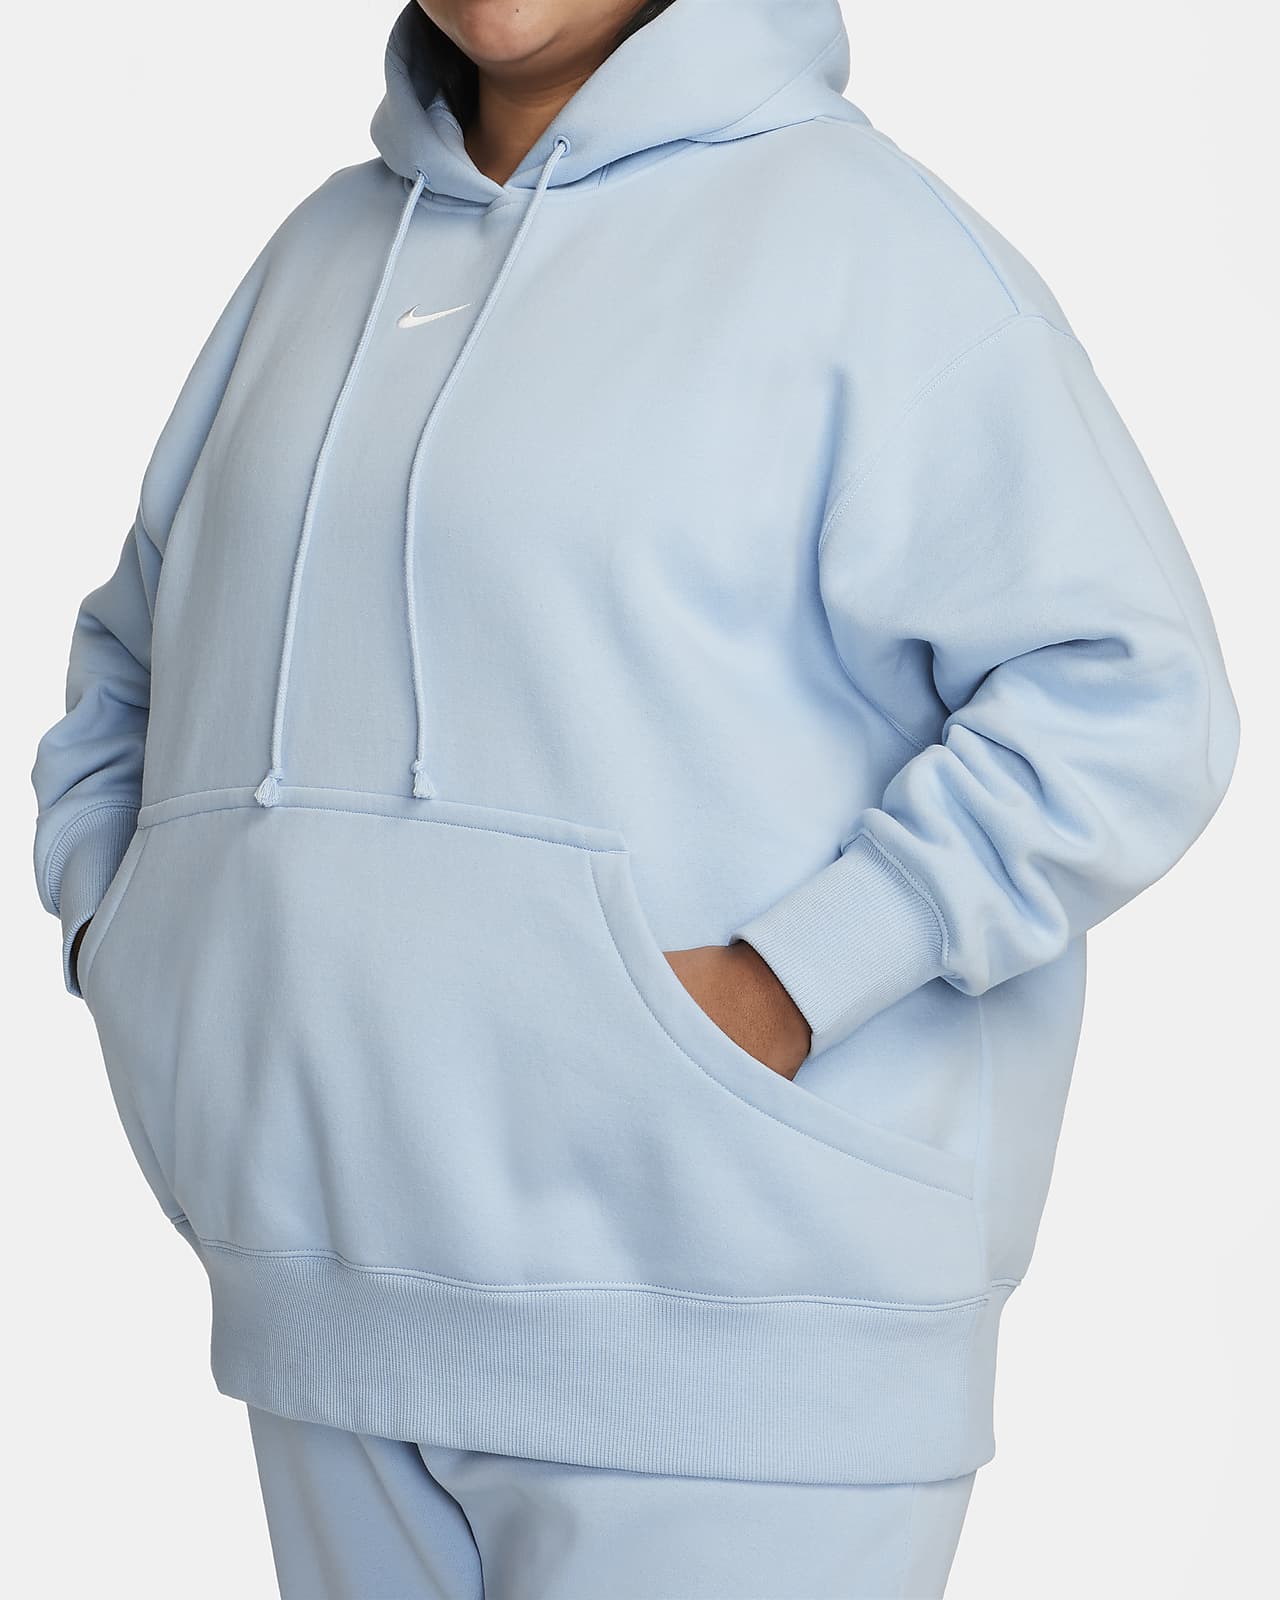 https://static.nike.com/a/images/t_PDP_1280_v1/f_auto,q_auto:eco/86f4b1a0-9cf5-4505-80c3-543ab971c2ee/sportswear-phoenix-fleece-oversized-pullover-hoodie-RPlb85.png